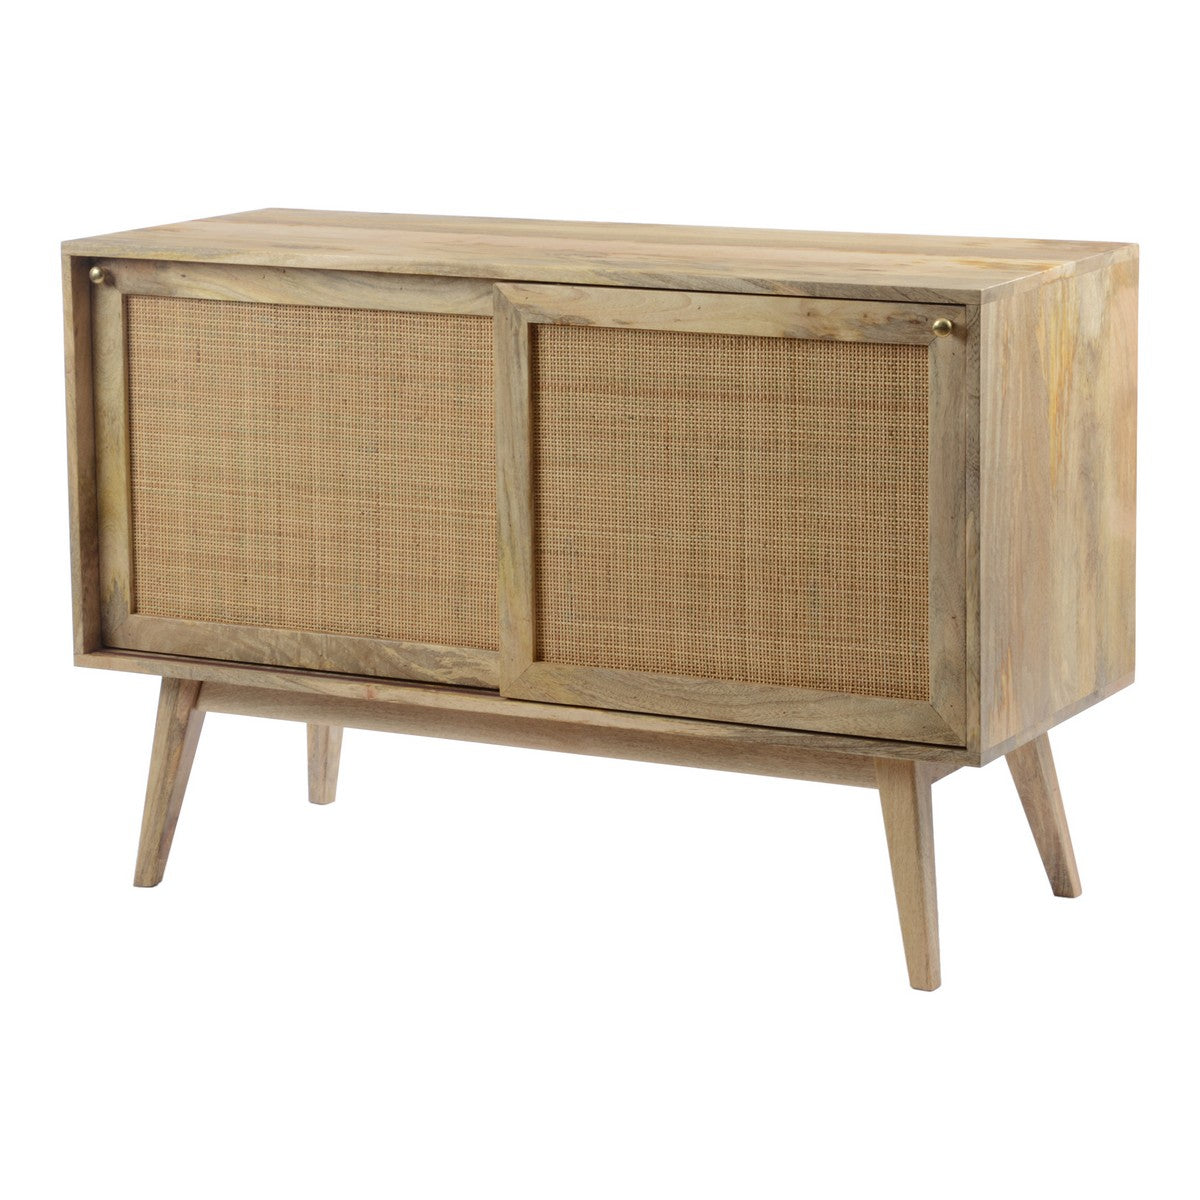 Moe's Home Collection Reed Sideboard Natural - BZ-1108-24